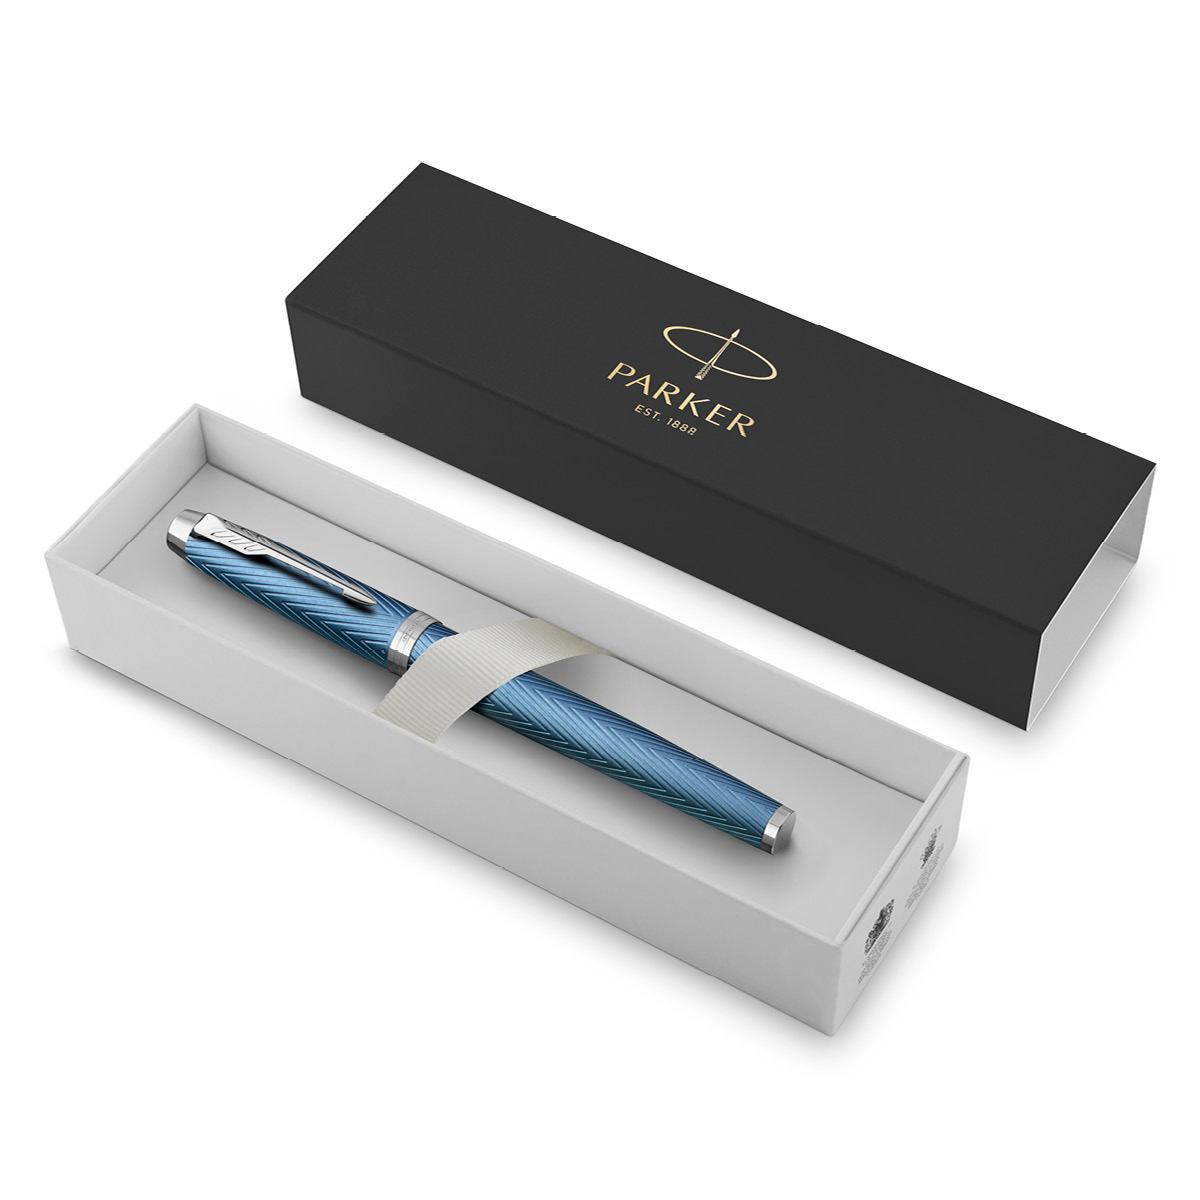 IM Premium Blue/Grey Rollerball in the group Pens / Fine Writing / Rollerball Pens at Pen Store (112695)